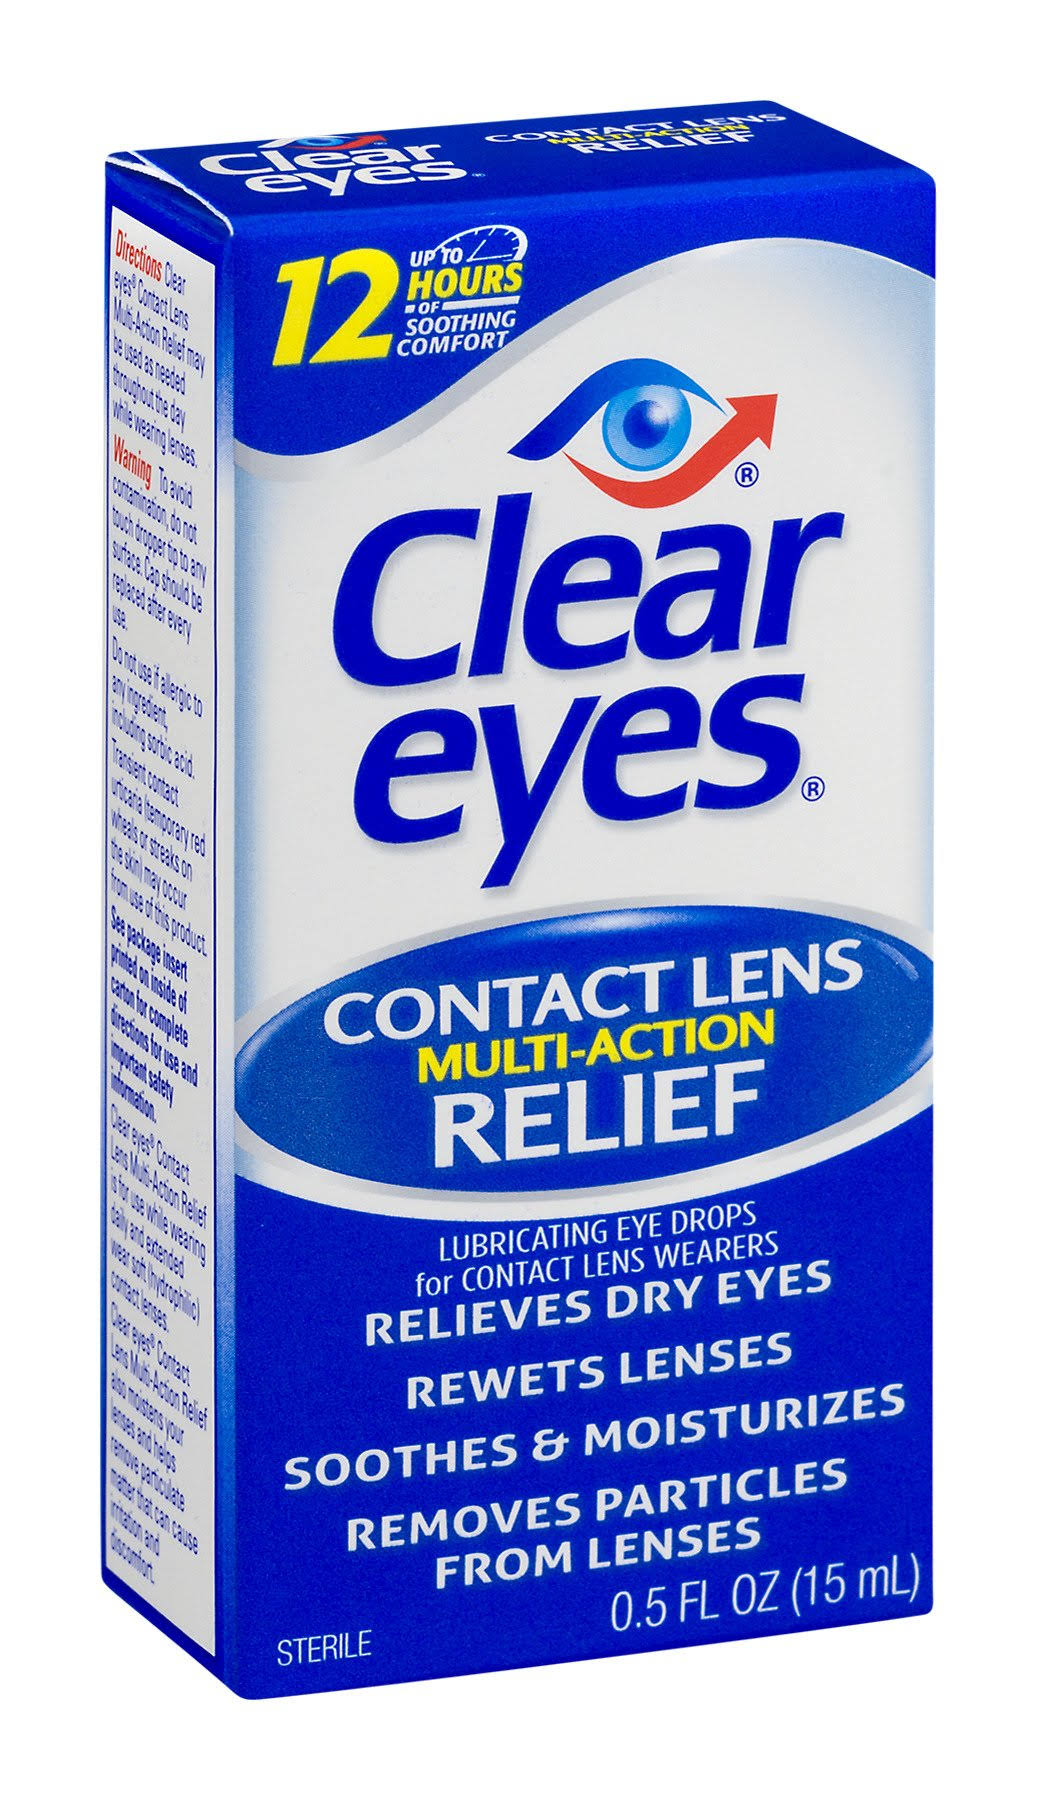 Clear Eyes Contact Lens Relief Soothing Eye Drops - 15ml